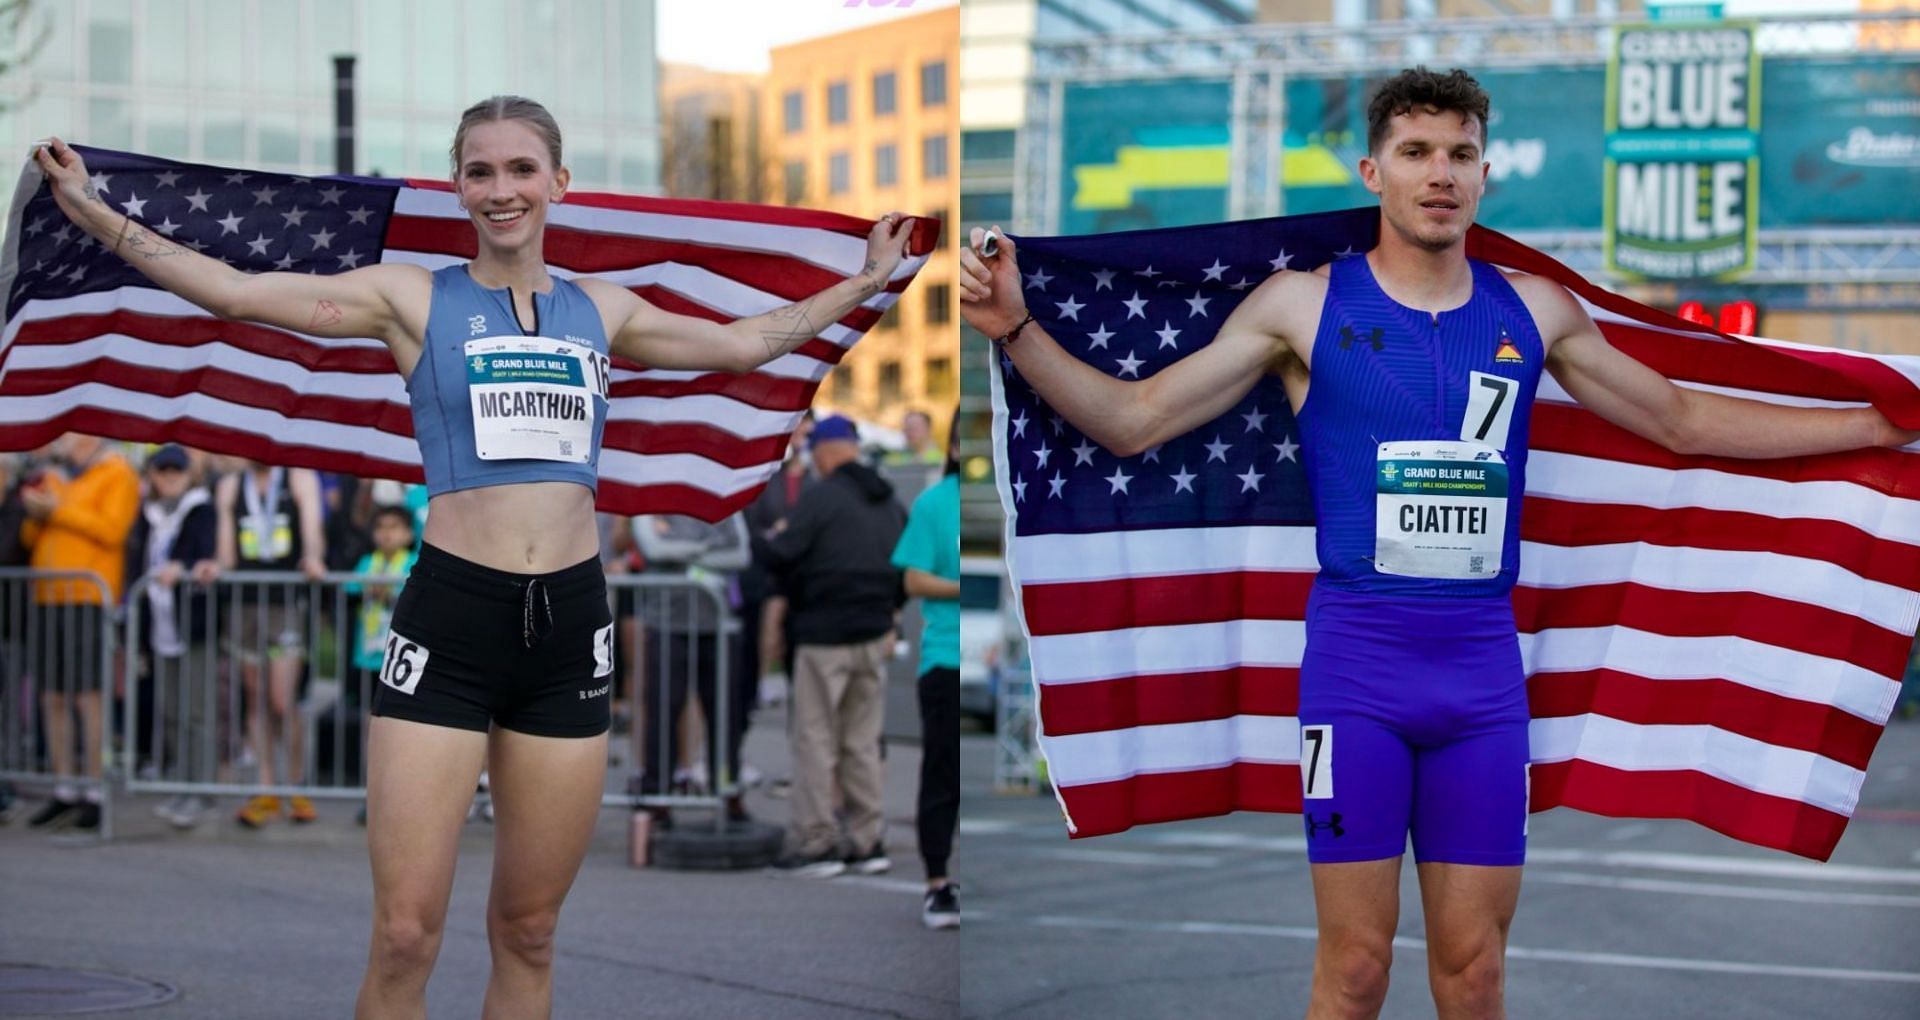 National title winners at the U.S Road Mile Championships 